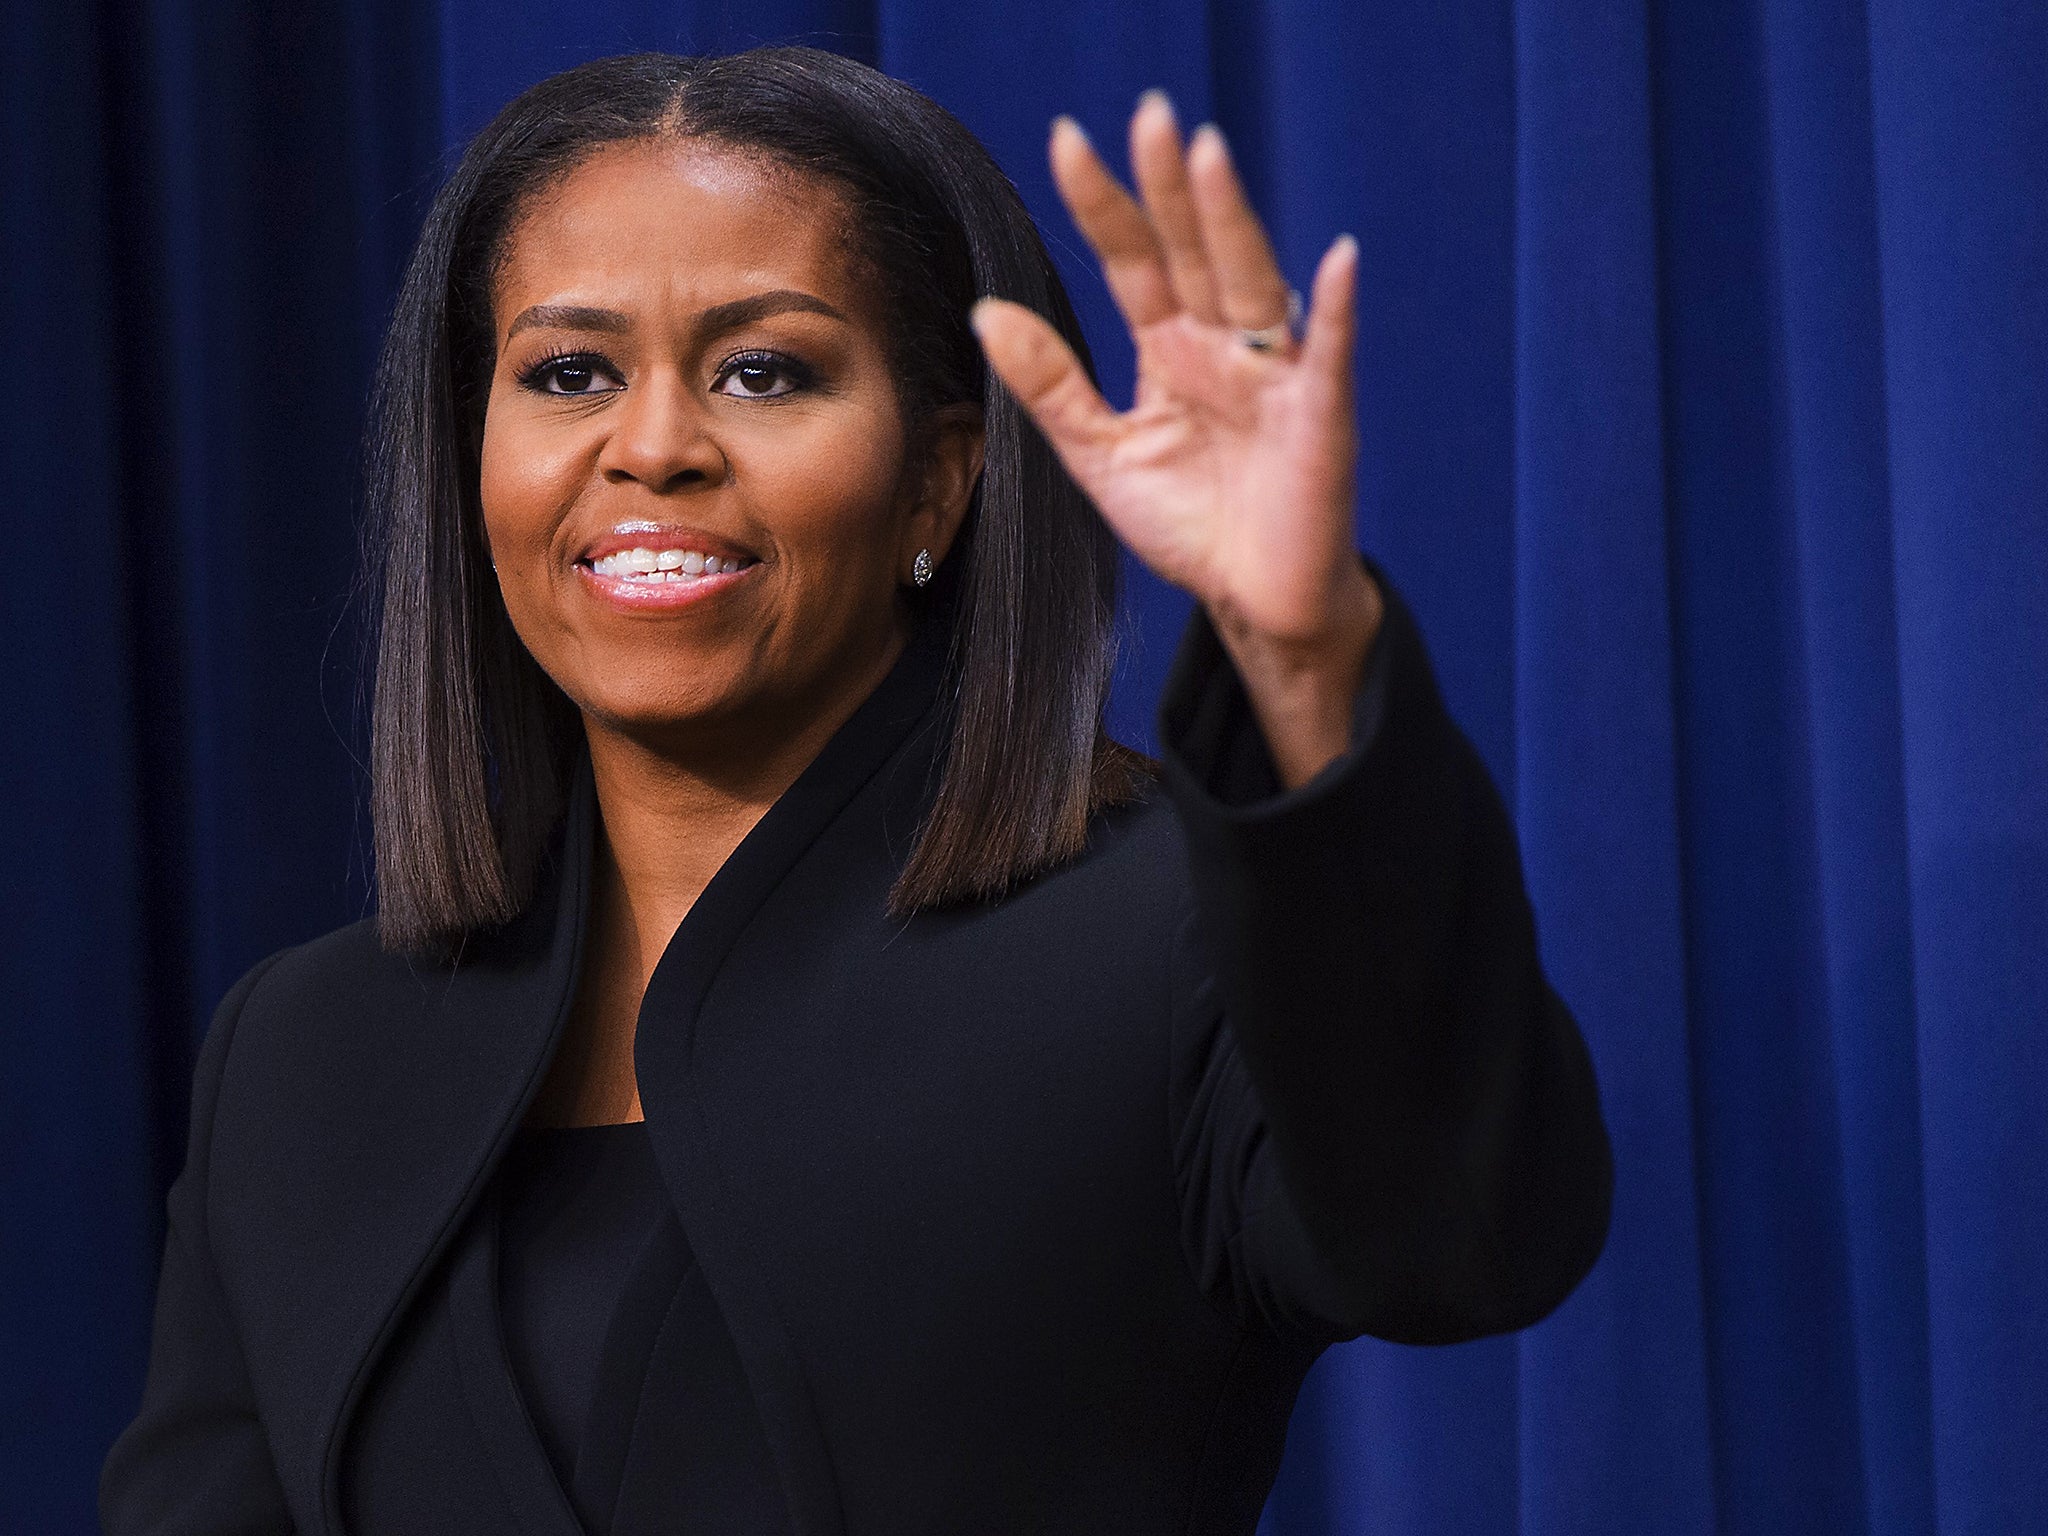 Former White House photographer says Michelle Obama taught her to turn challenges into strengths rather than weaknesses